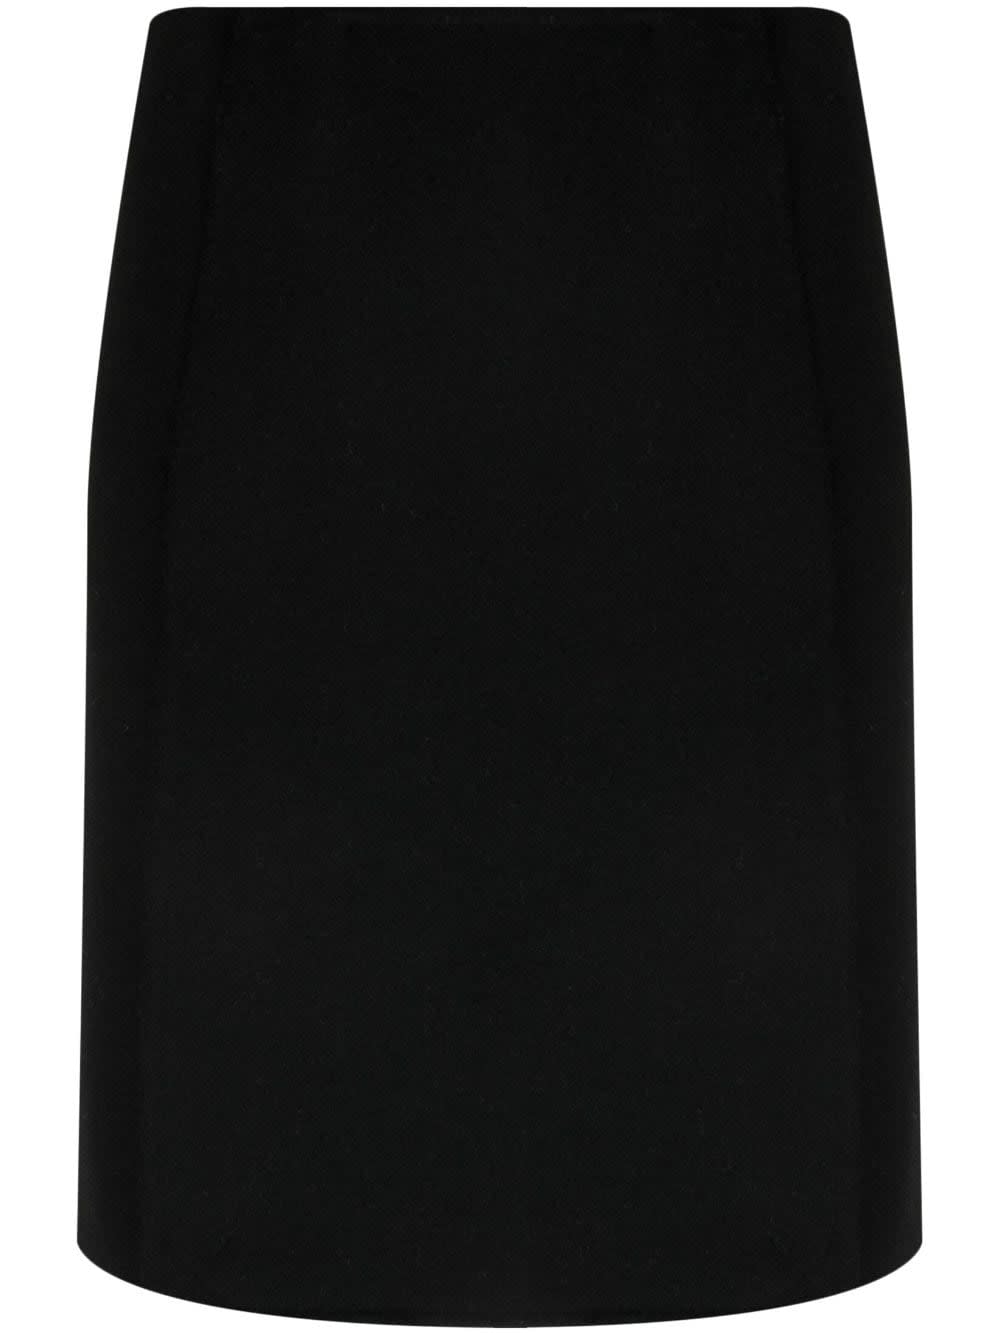 P.A.R.O.S.H DOUBLE SHORT SKIRT WITH SLIT